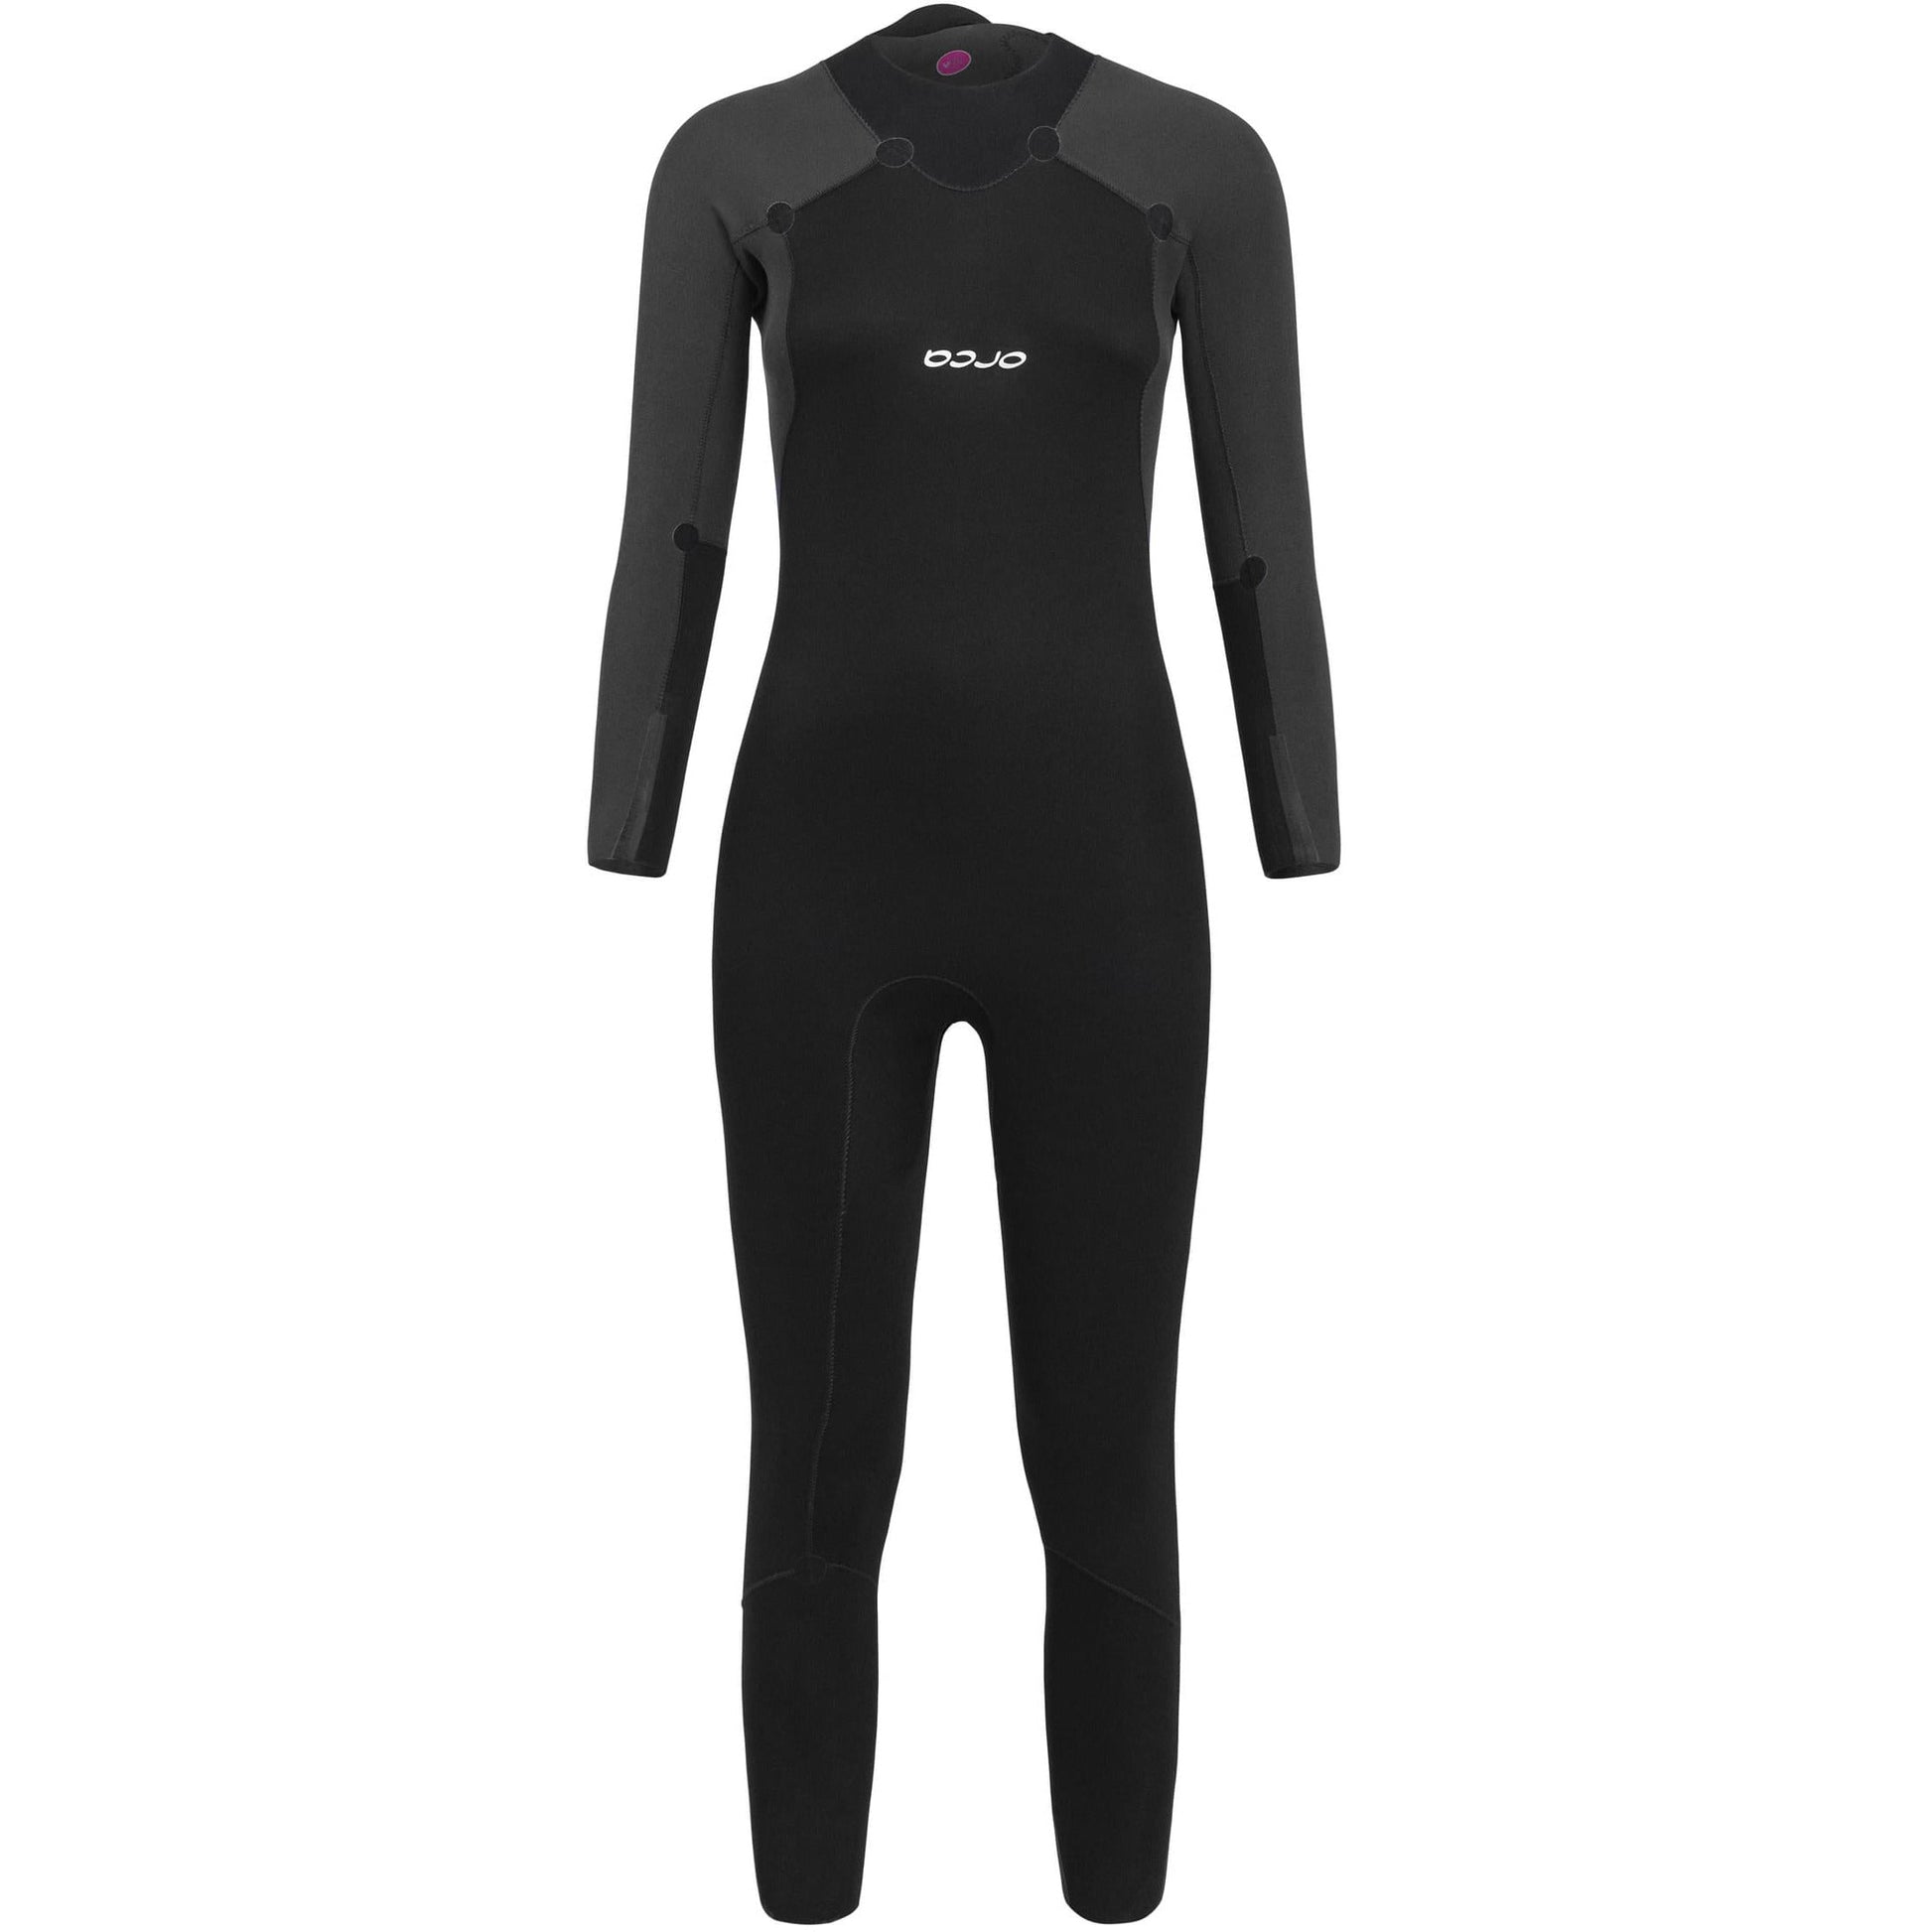 Orca Vitalis Trn Openwater Wetsuit Nn68 Inside Front - Front View